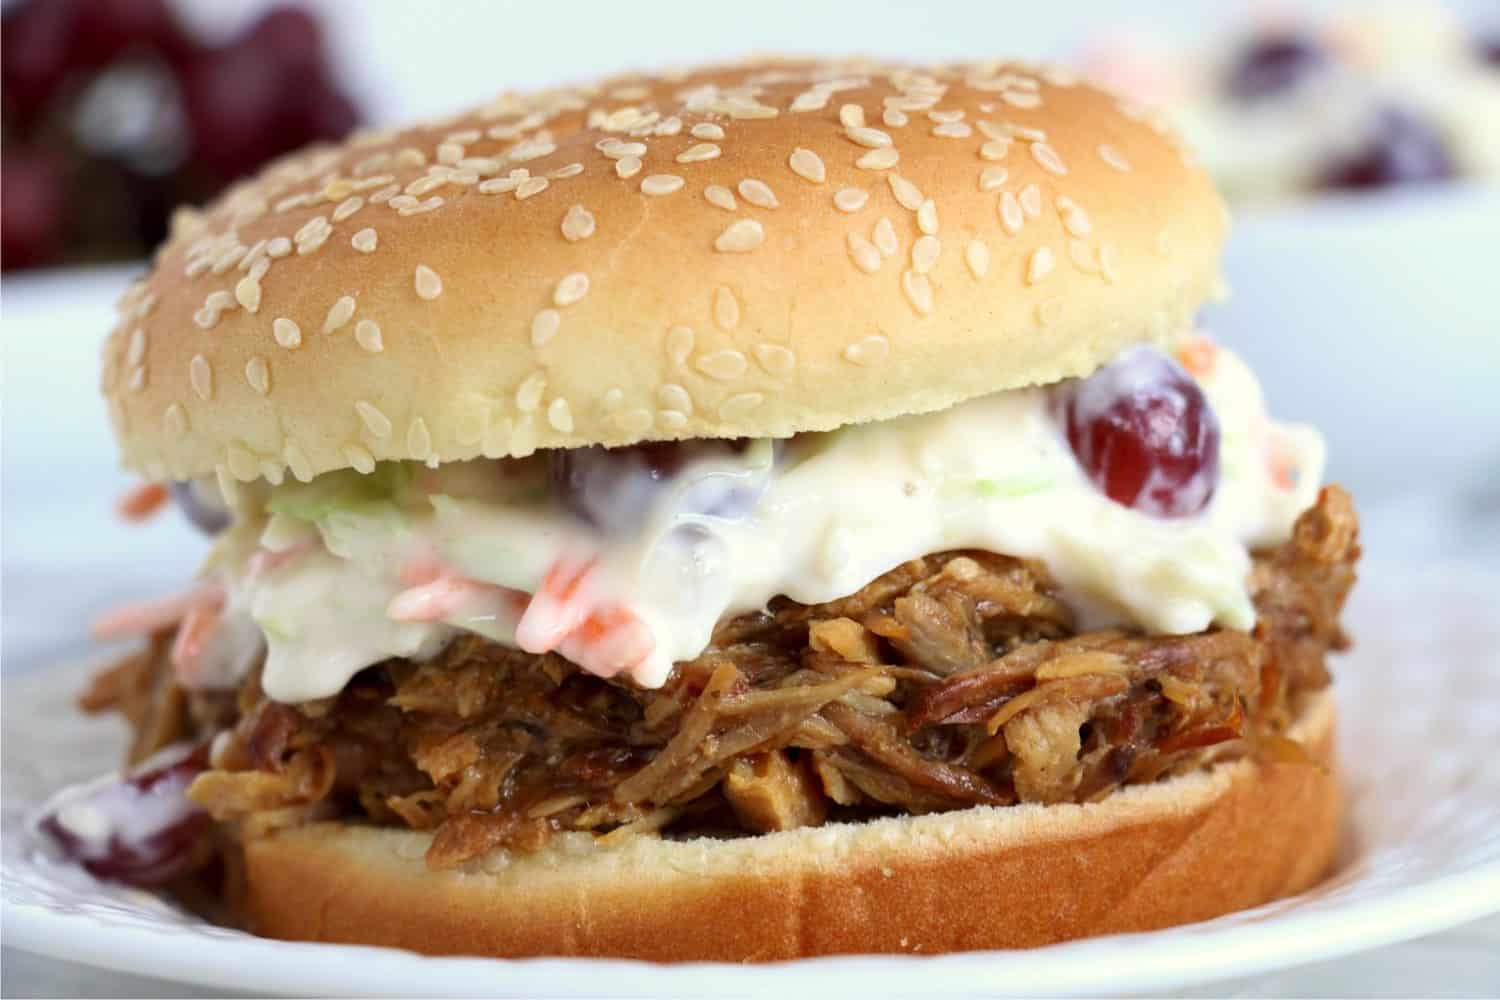 A close-up shot of a hamburger made with Crock Pot BBQ Pulled Pork and cole slaw